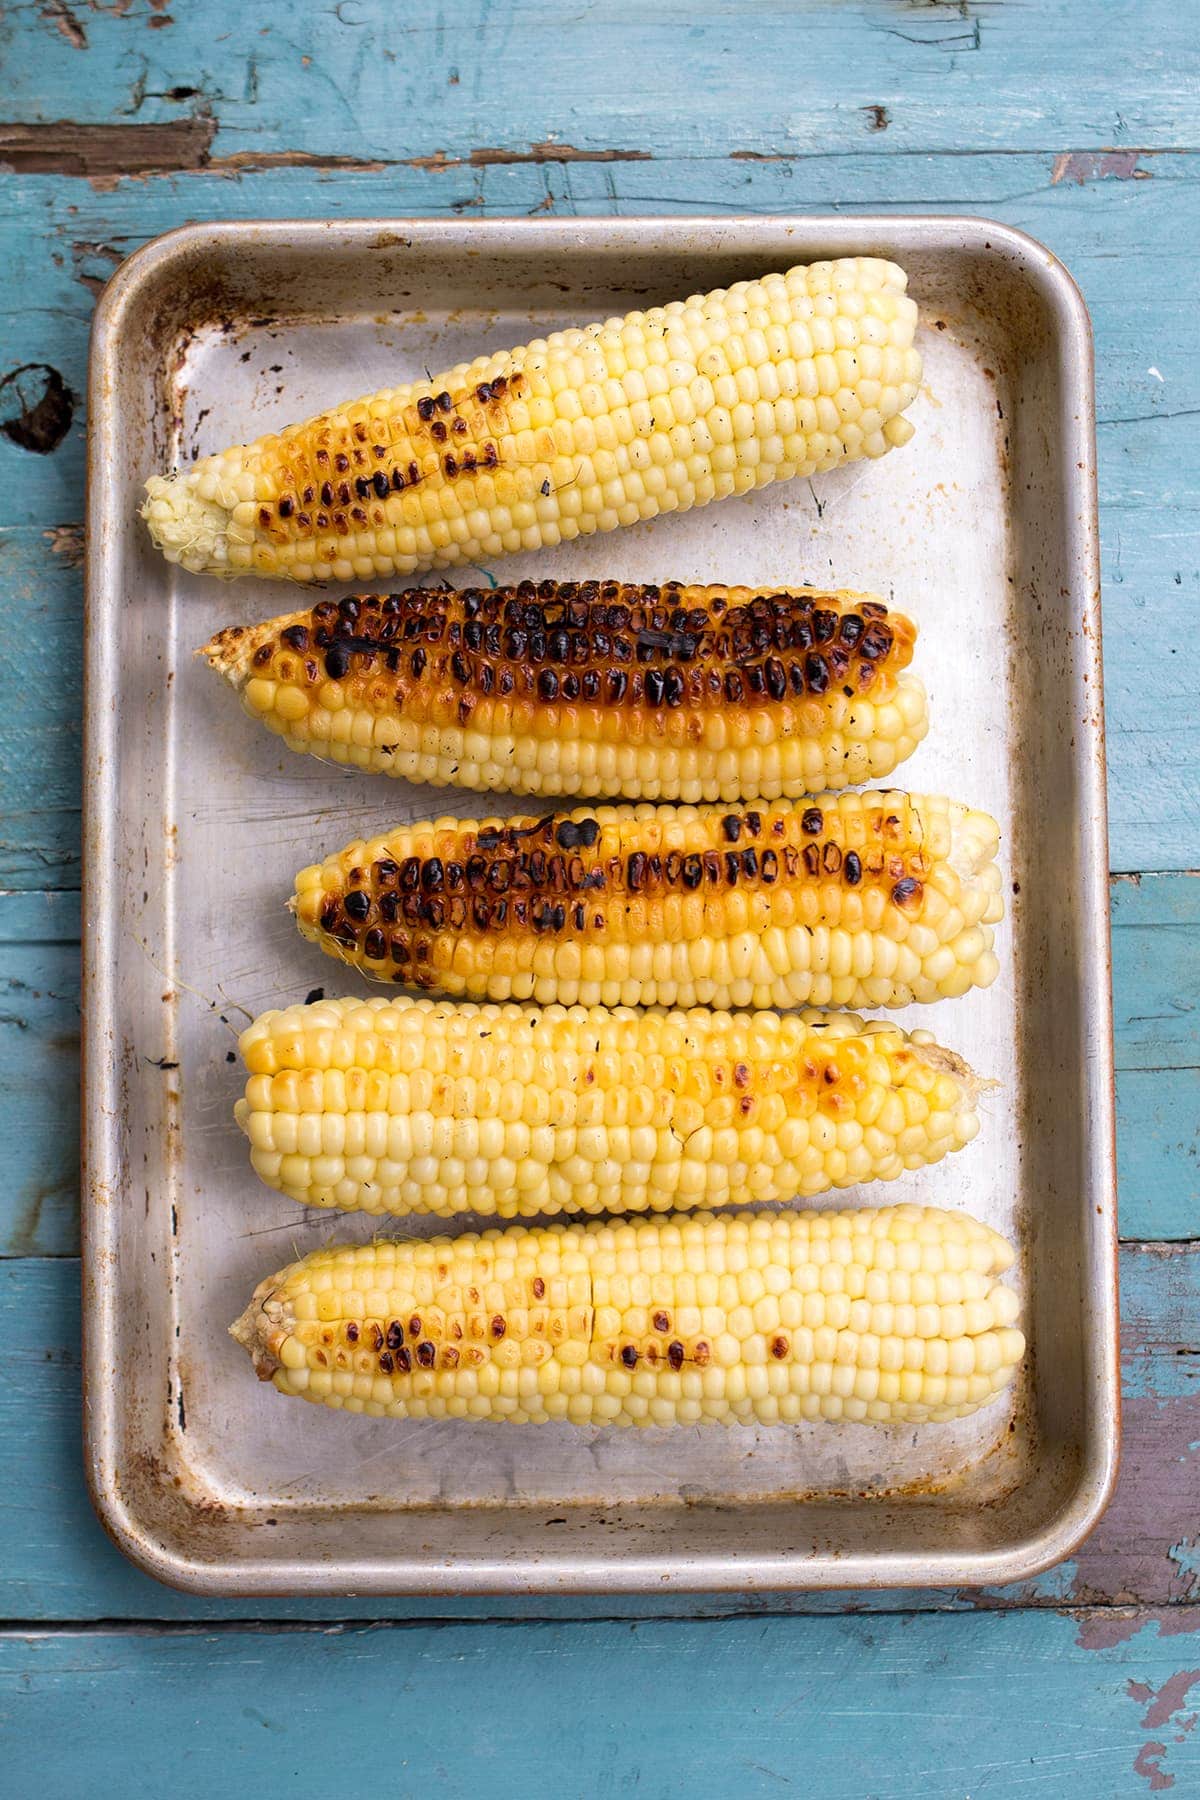 Grilled Mexican Corn Salad